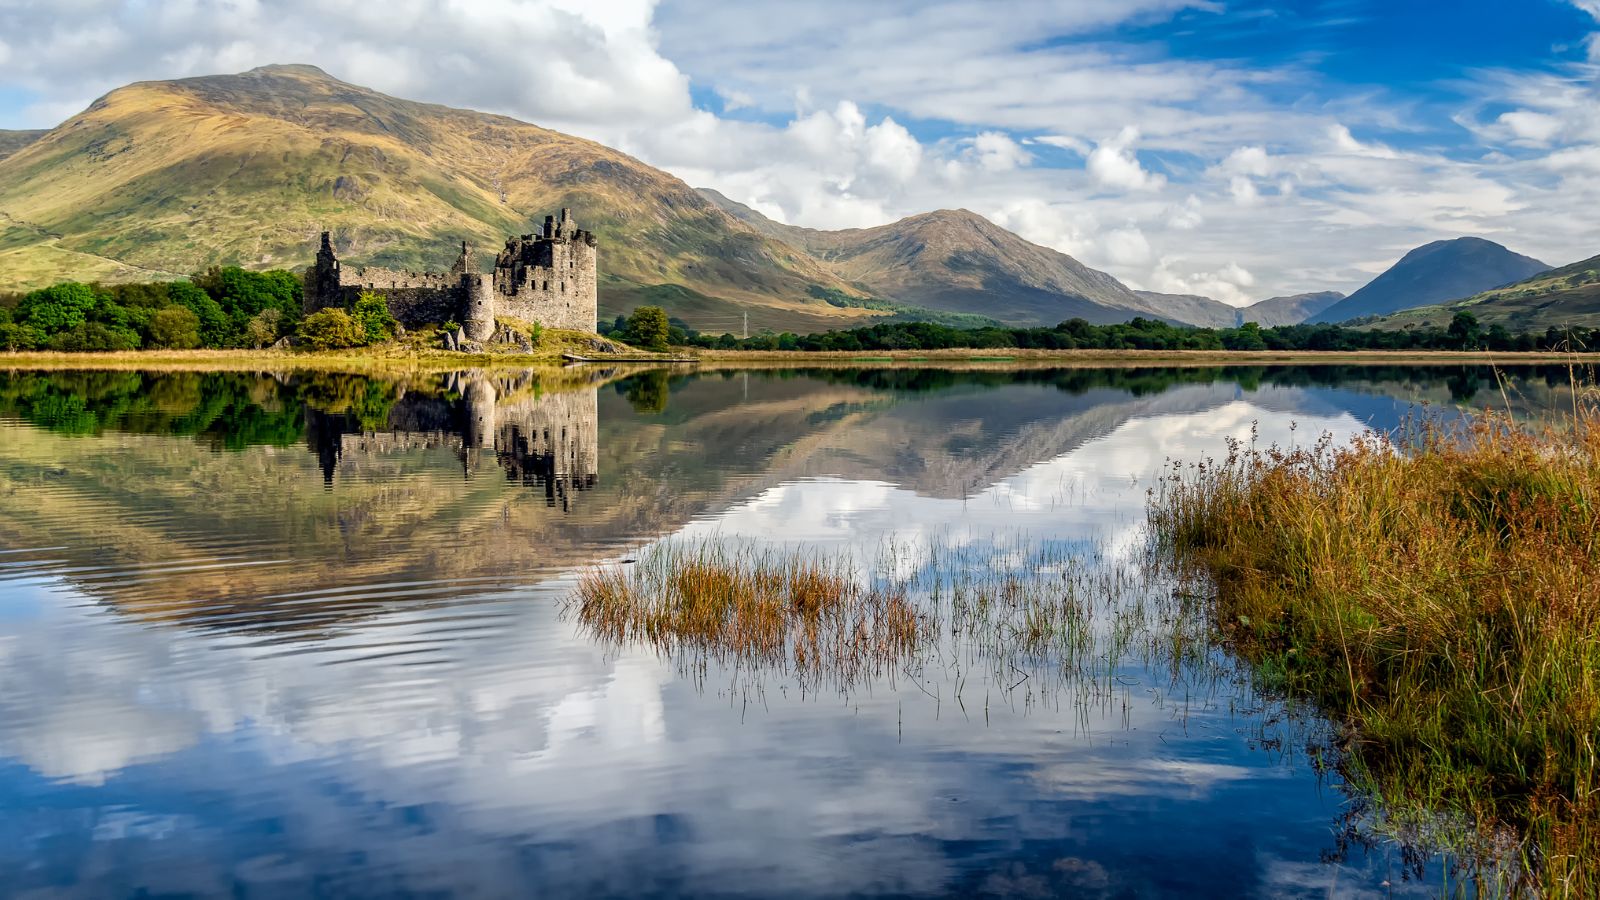 <p>Scotland <em>feels</em> old – there’s just something in the air. Its castles make that sense of history tangible, though. From world-famous fortresses still frequented by British royalty to lesser-known ruins on tiny islands, there could have been up to <a href="https://www.visitscotland.com/things-to-do/attractions/castles/great-scottish-castles" rel="noreferrer noopener">3000 castles</a> here at one point.</p><p>Exploring them is another of the best things to do in Scotland. Edinburgh, Balmoral, and Dunnottar Castles stand out, but the list is endless.</p>